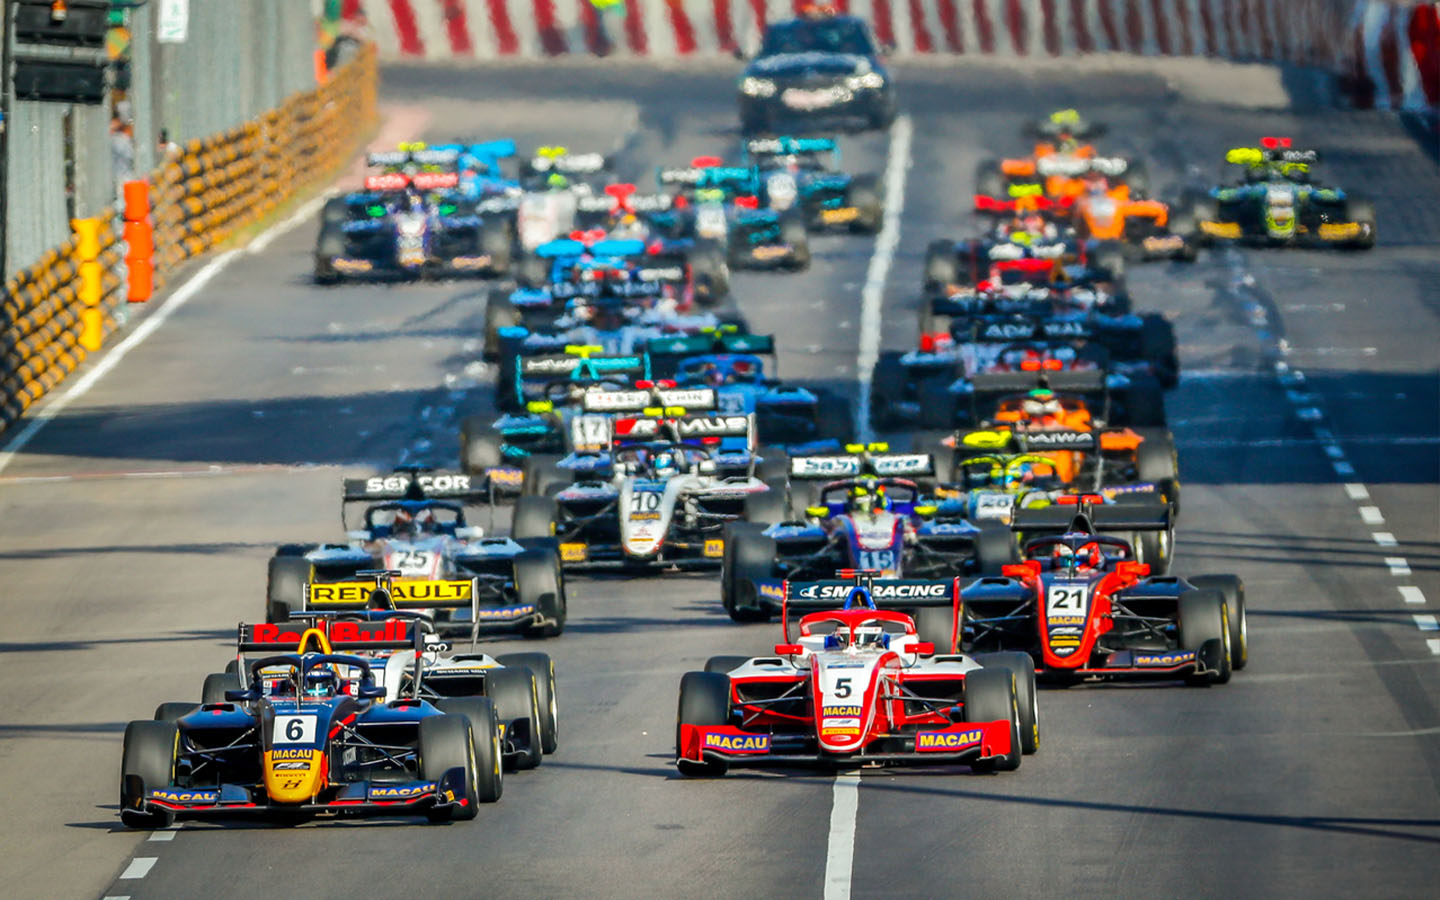 Sports chief defends the switch to Formula Regional racing at the Macau Grand Prix